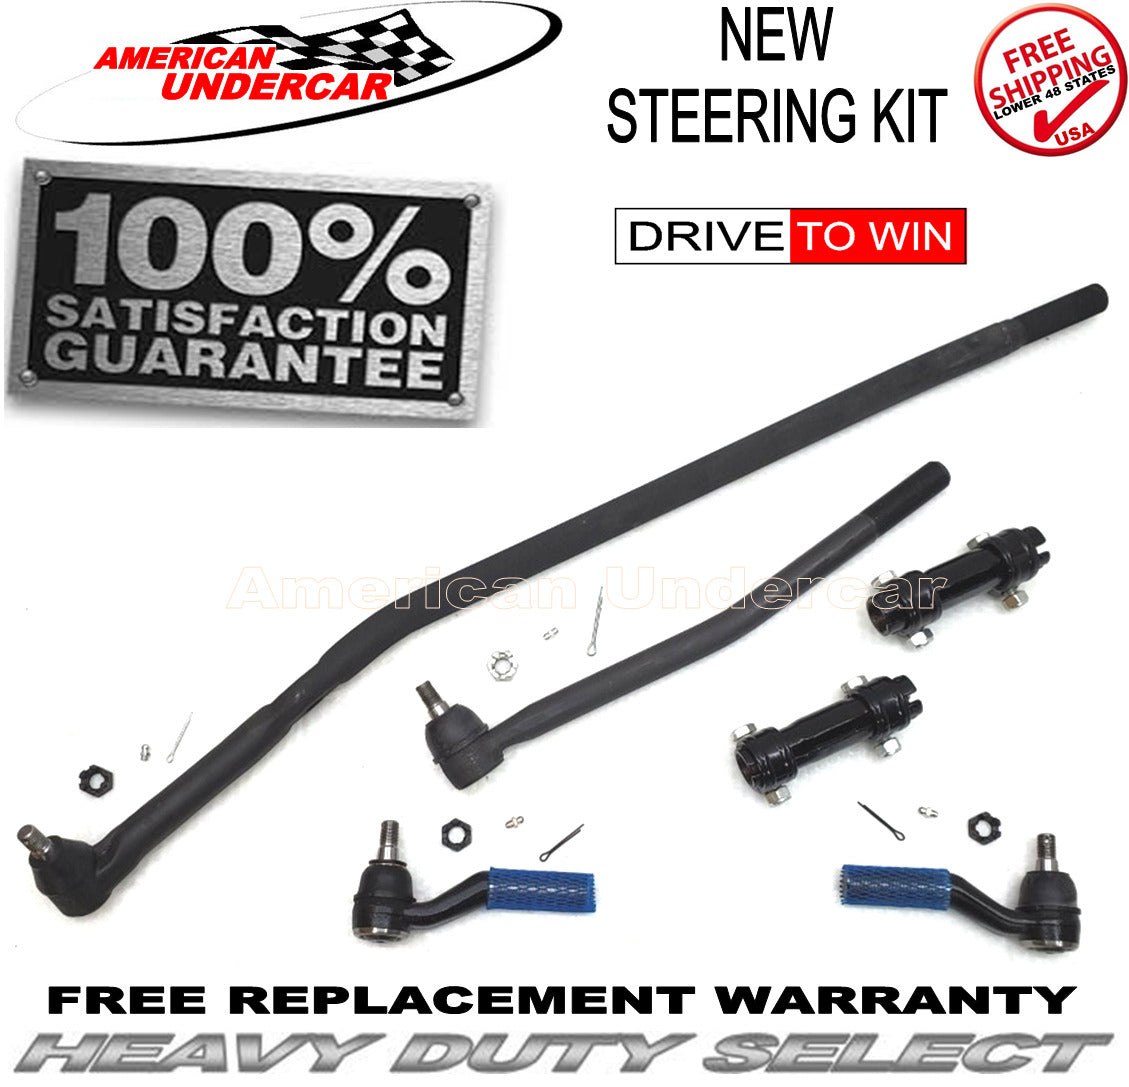 HD Drag Link Tie Rod Sleeve Steering Suspension Kit for 2007-2014 Ford E150 2WD